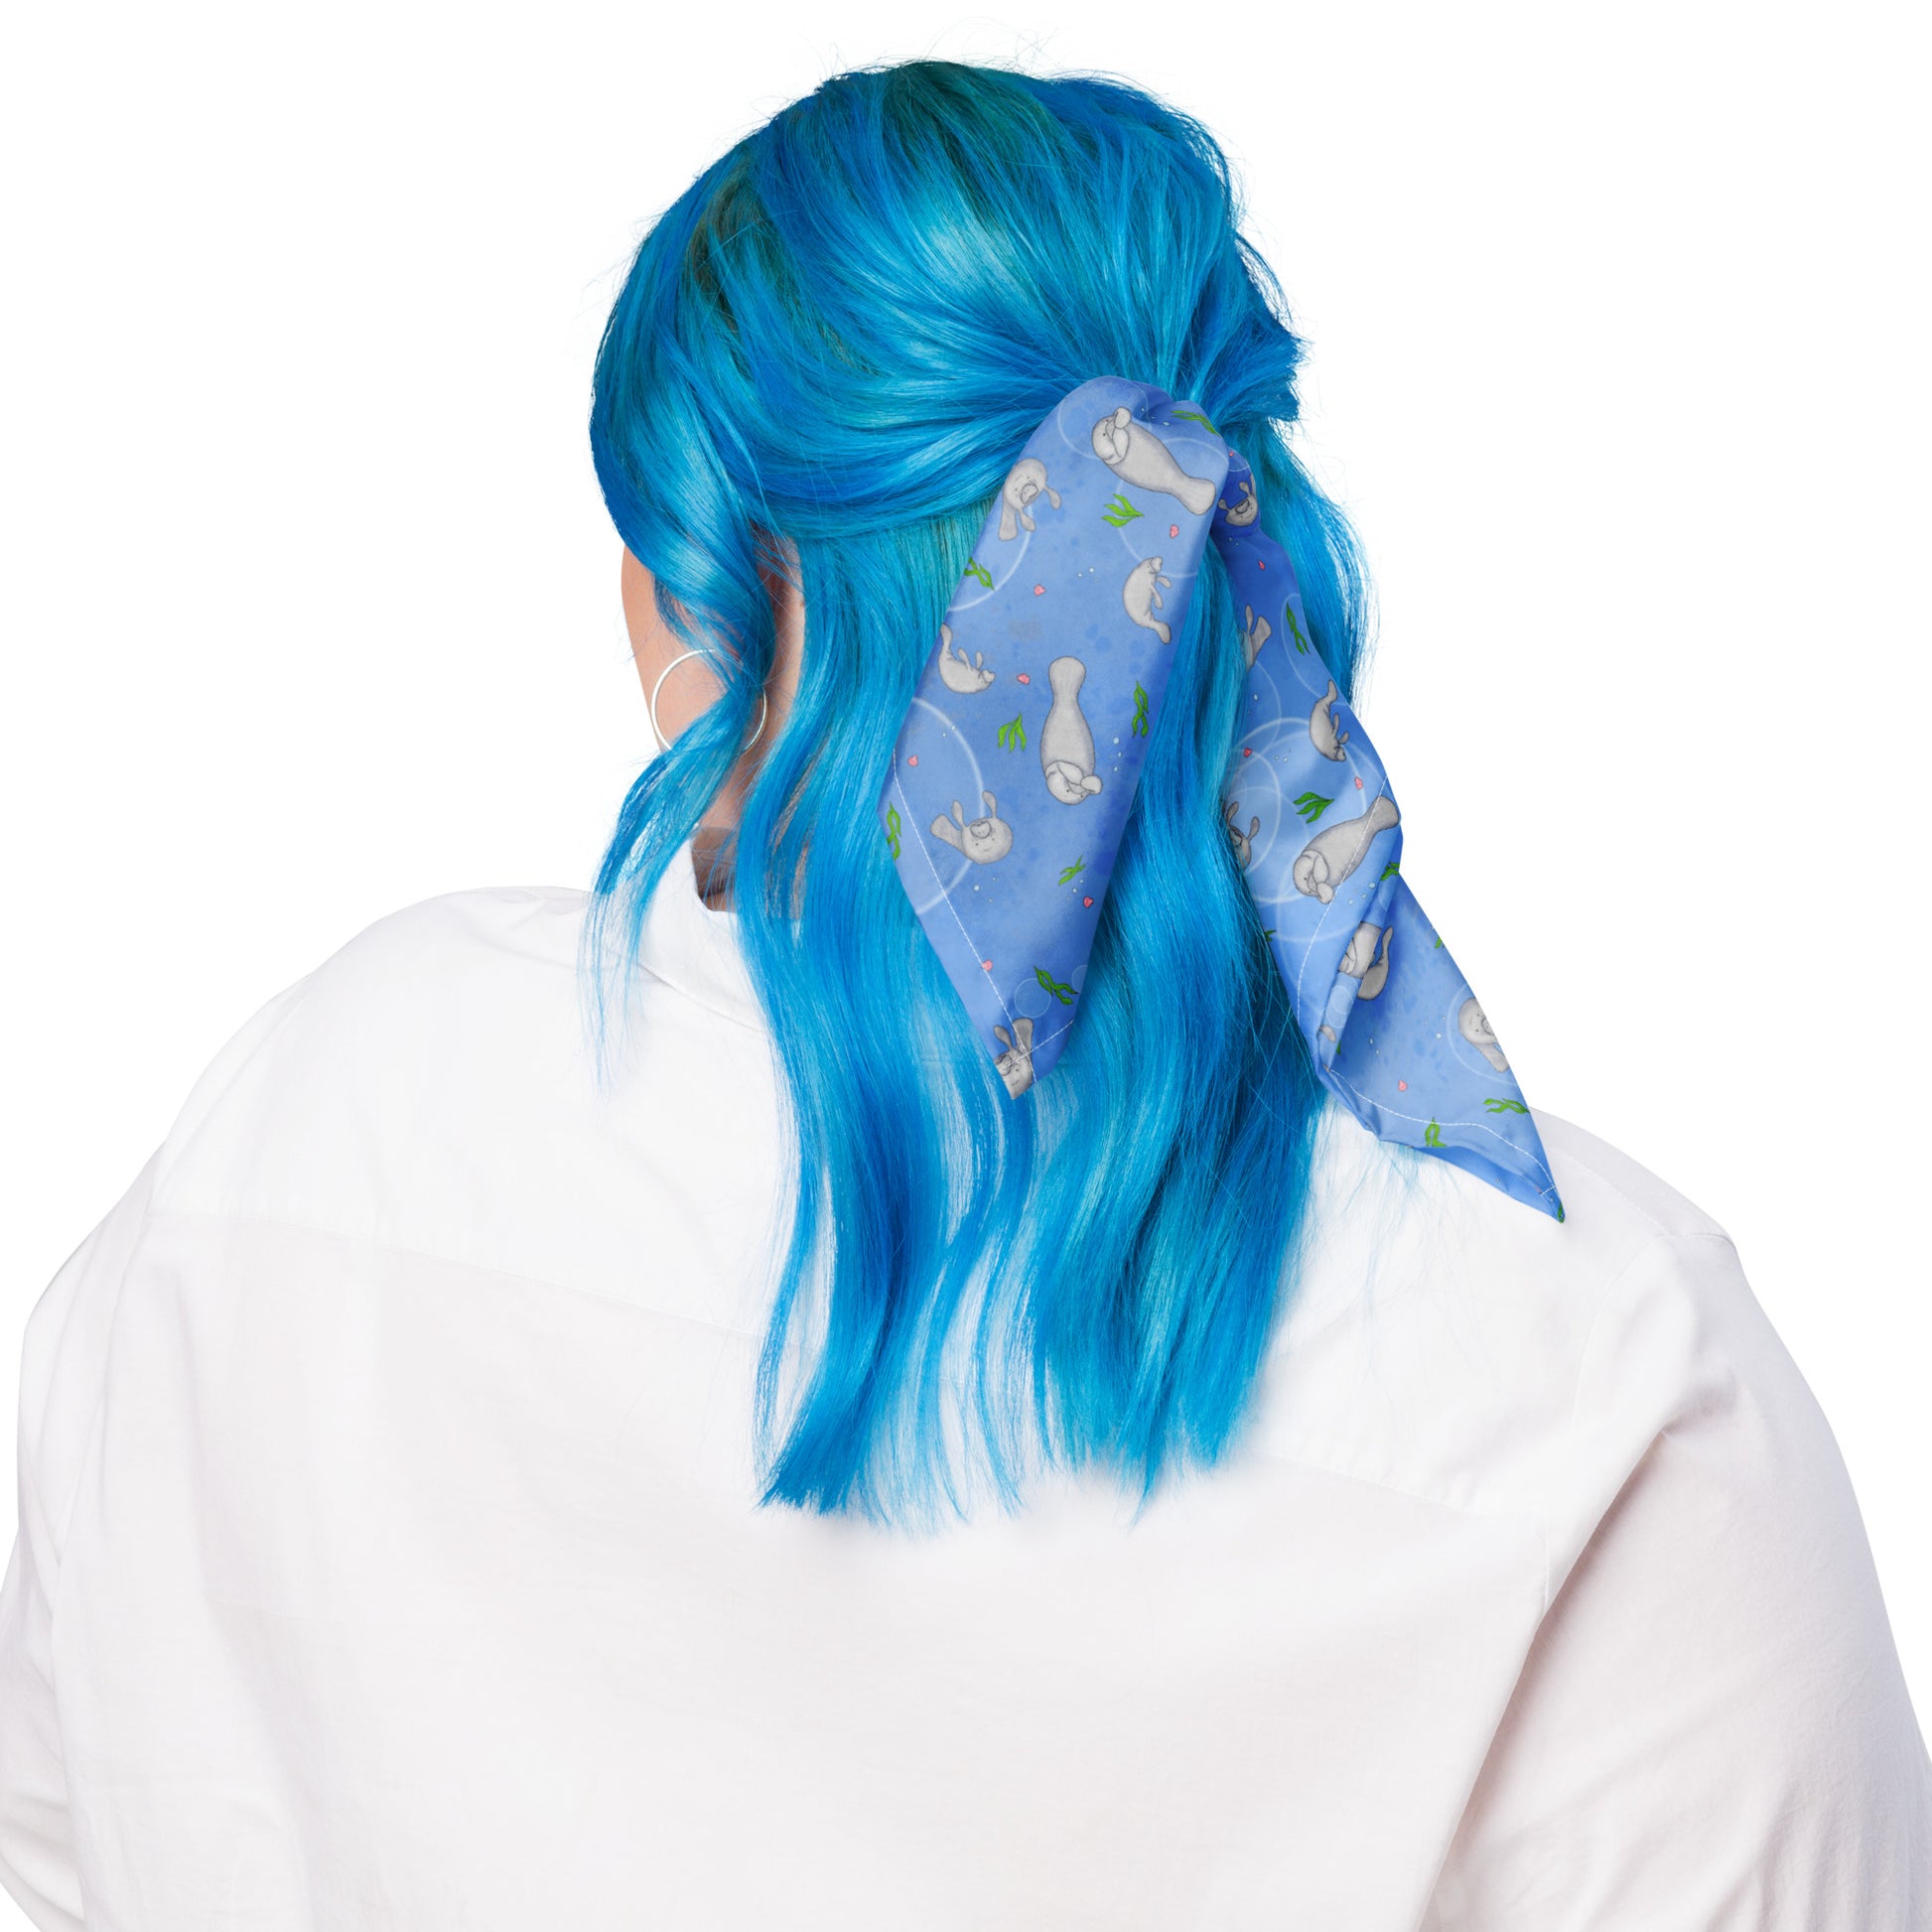 Manatee bandana. Shown as a hair ribbon on a female model. Features patterned design of hand-illustrated manatees, seaweed, seashells, and bubbles on a blue  background.